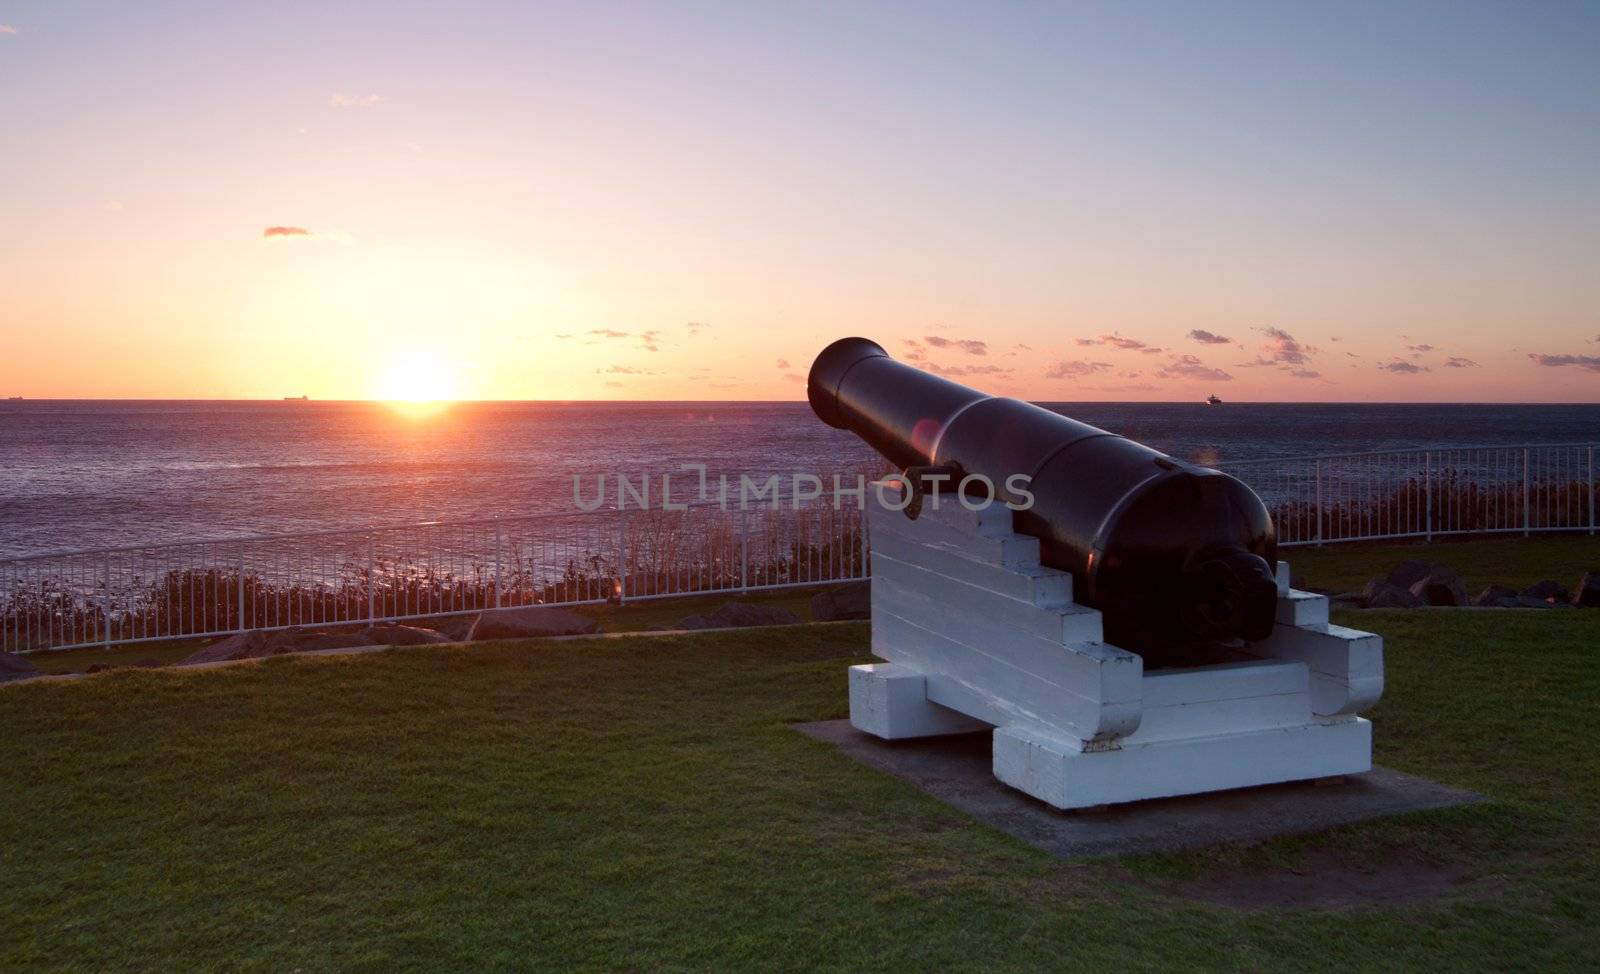 ocean sunrise and cannons at wollongong by clearviewstock